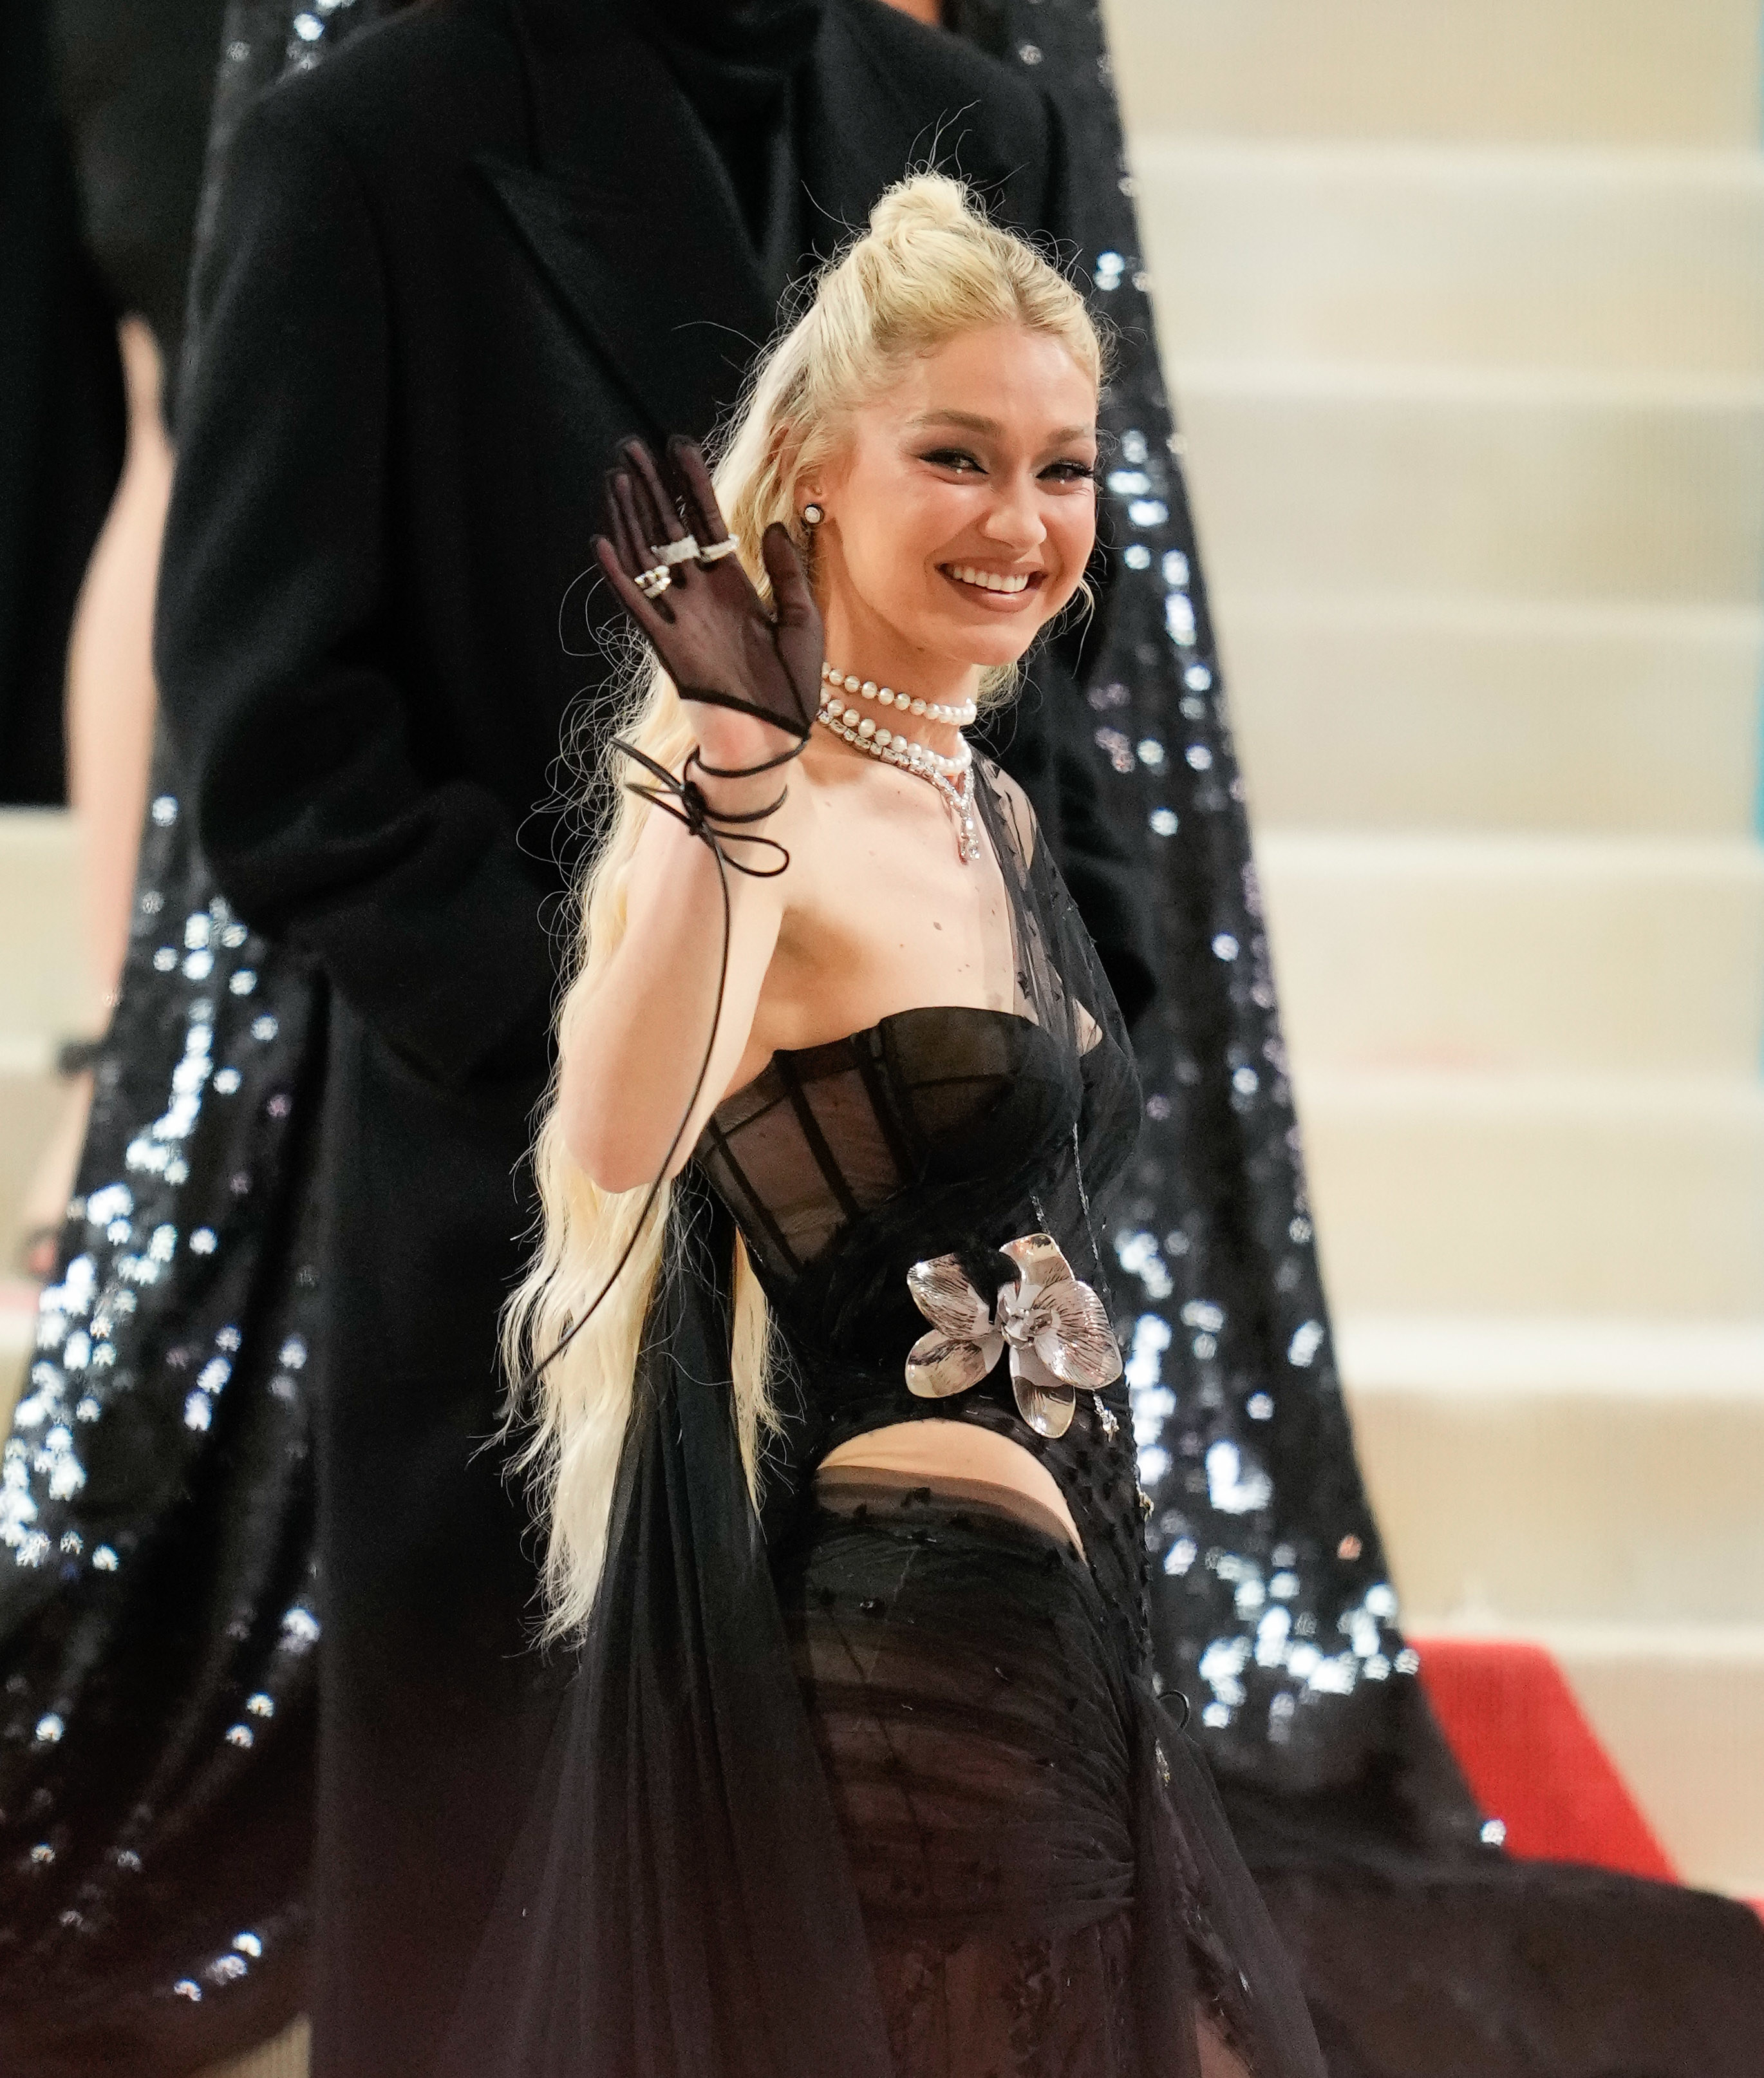 Gigi Hadid waves to the camera while walking up the steps at The Met Gala